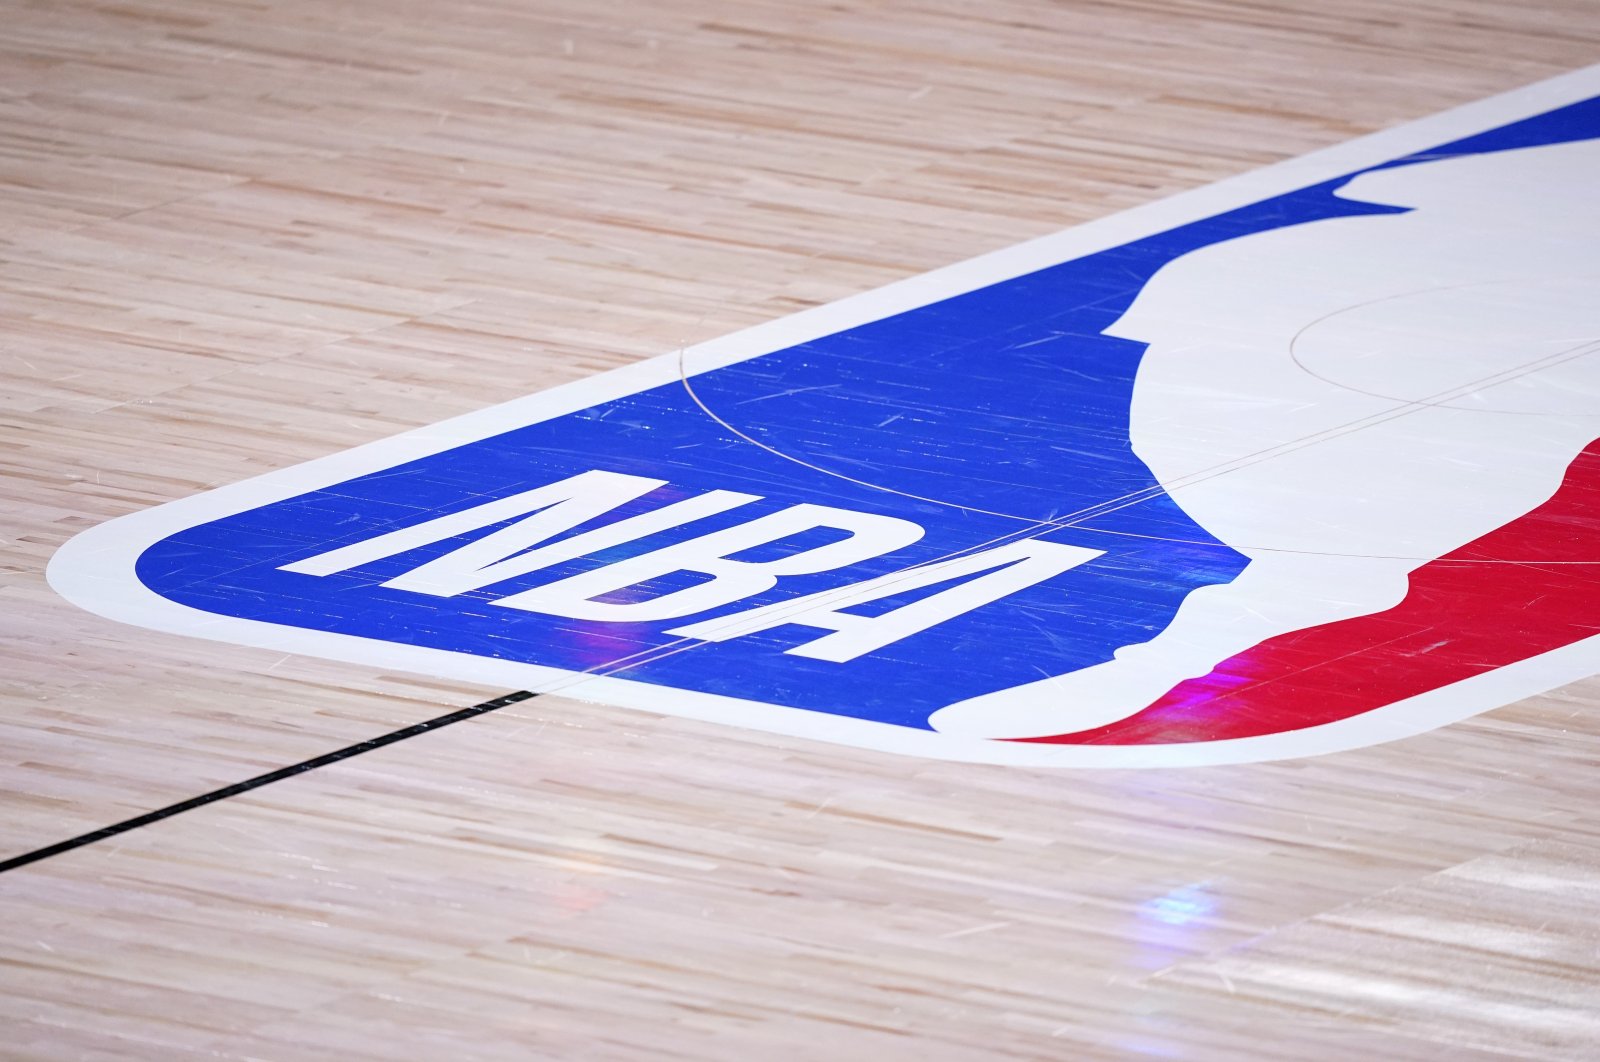 The NBA logo is seen on the court floor during a match Lake Buena Vista, U.S., Sept. 22, 2020. (AP Photo)